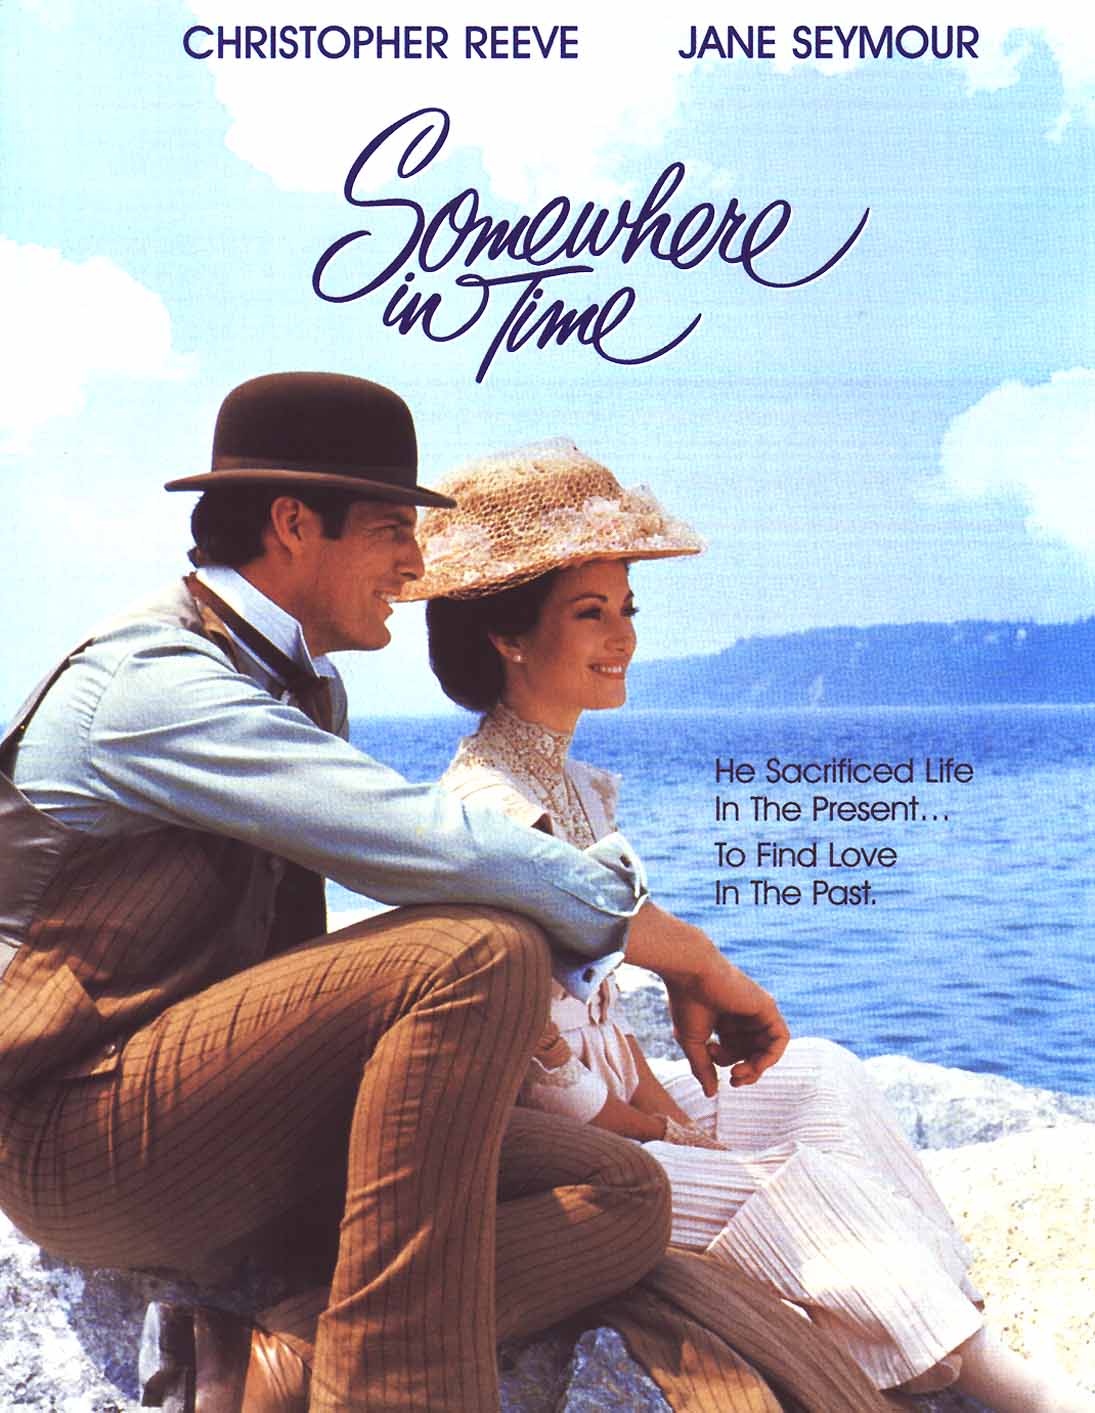 1980 Somewhere In Time